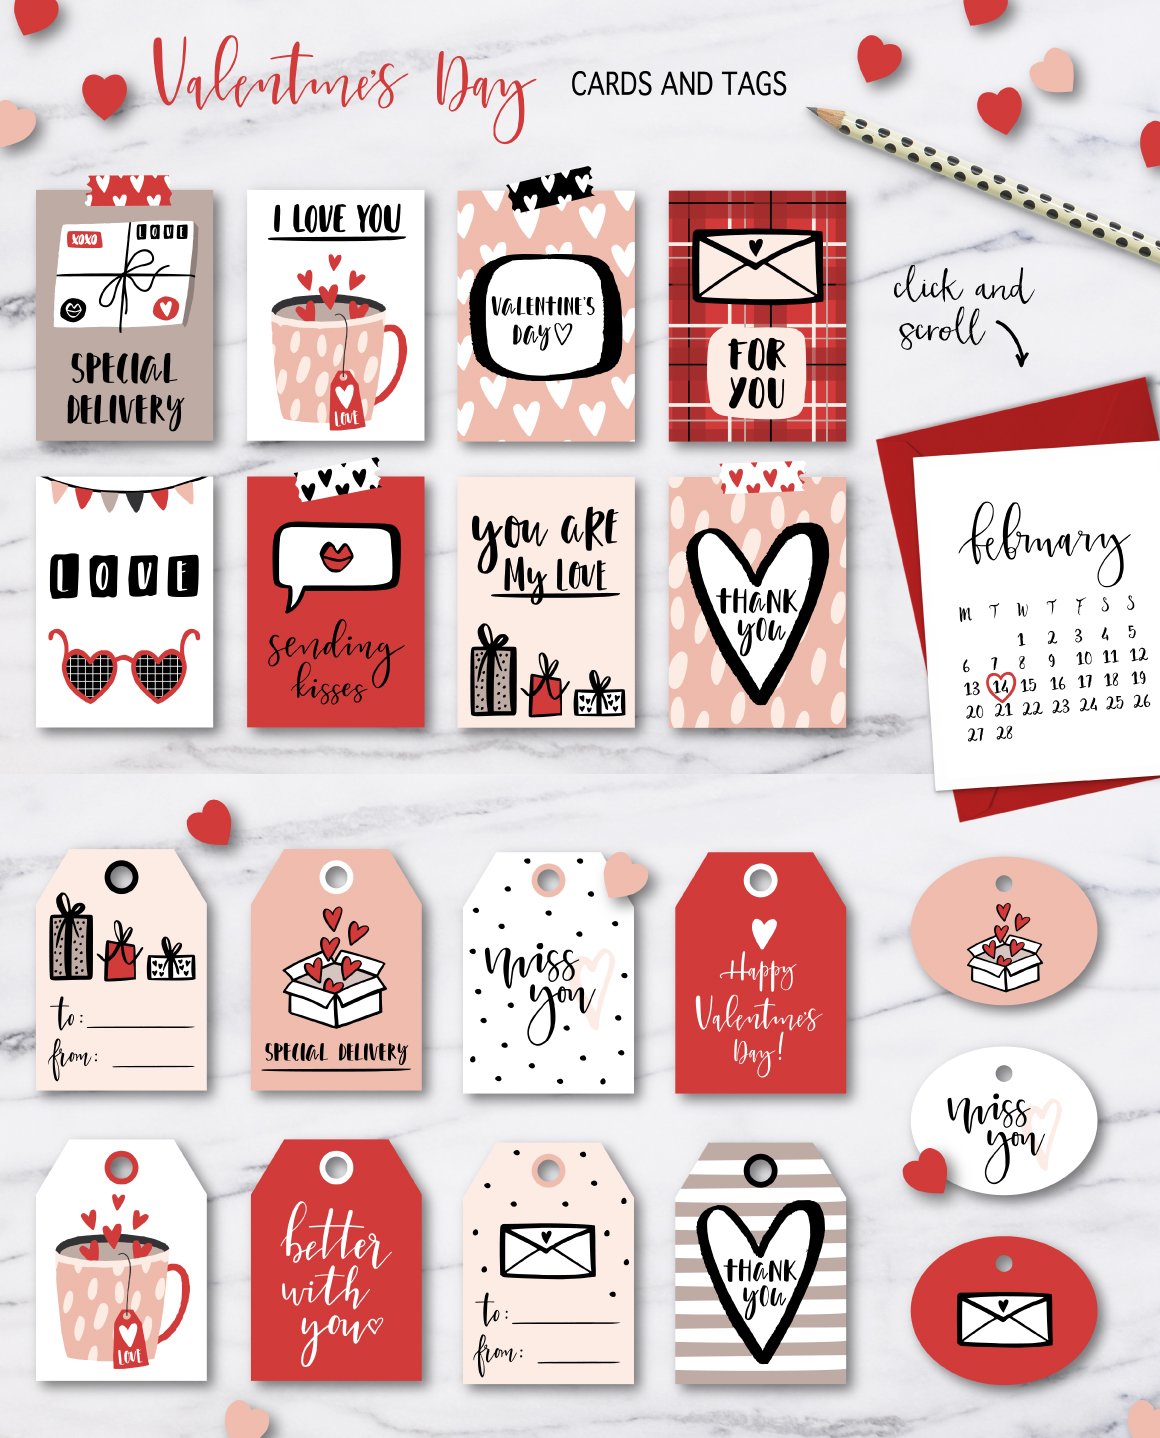 A red, pink and black set of 8 cards and 8 tags on a Valentine's Day theme on a gray background.